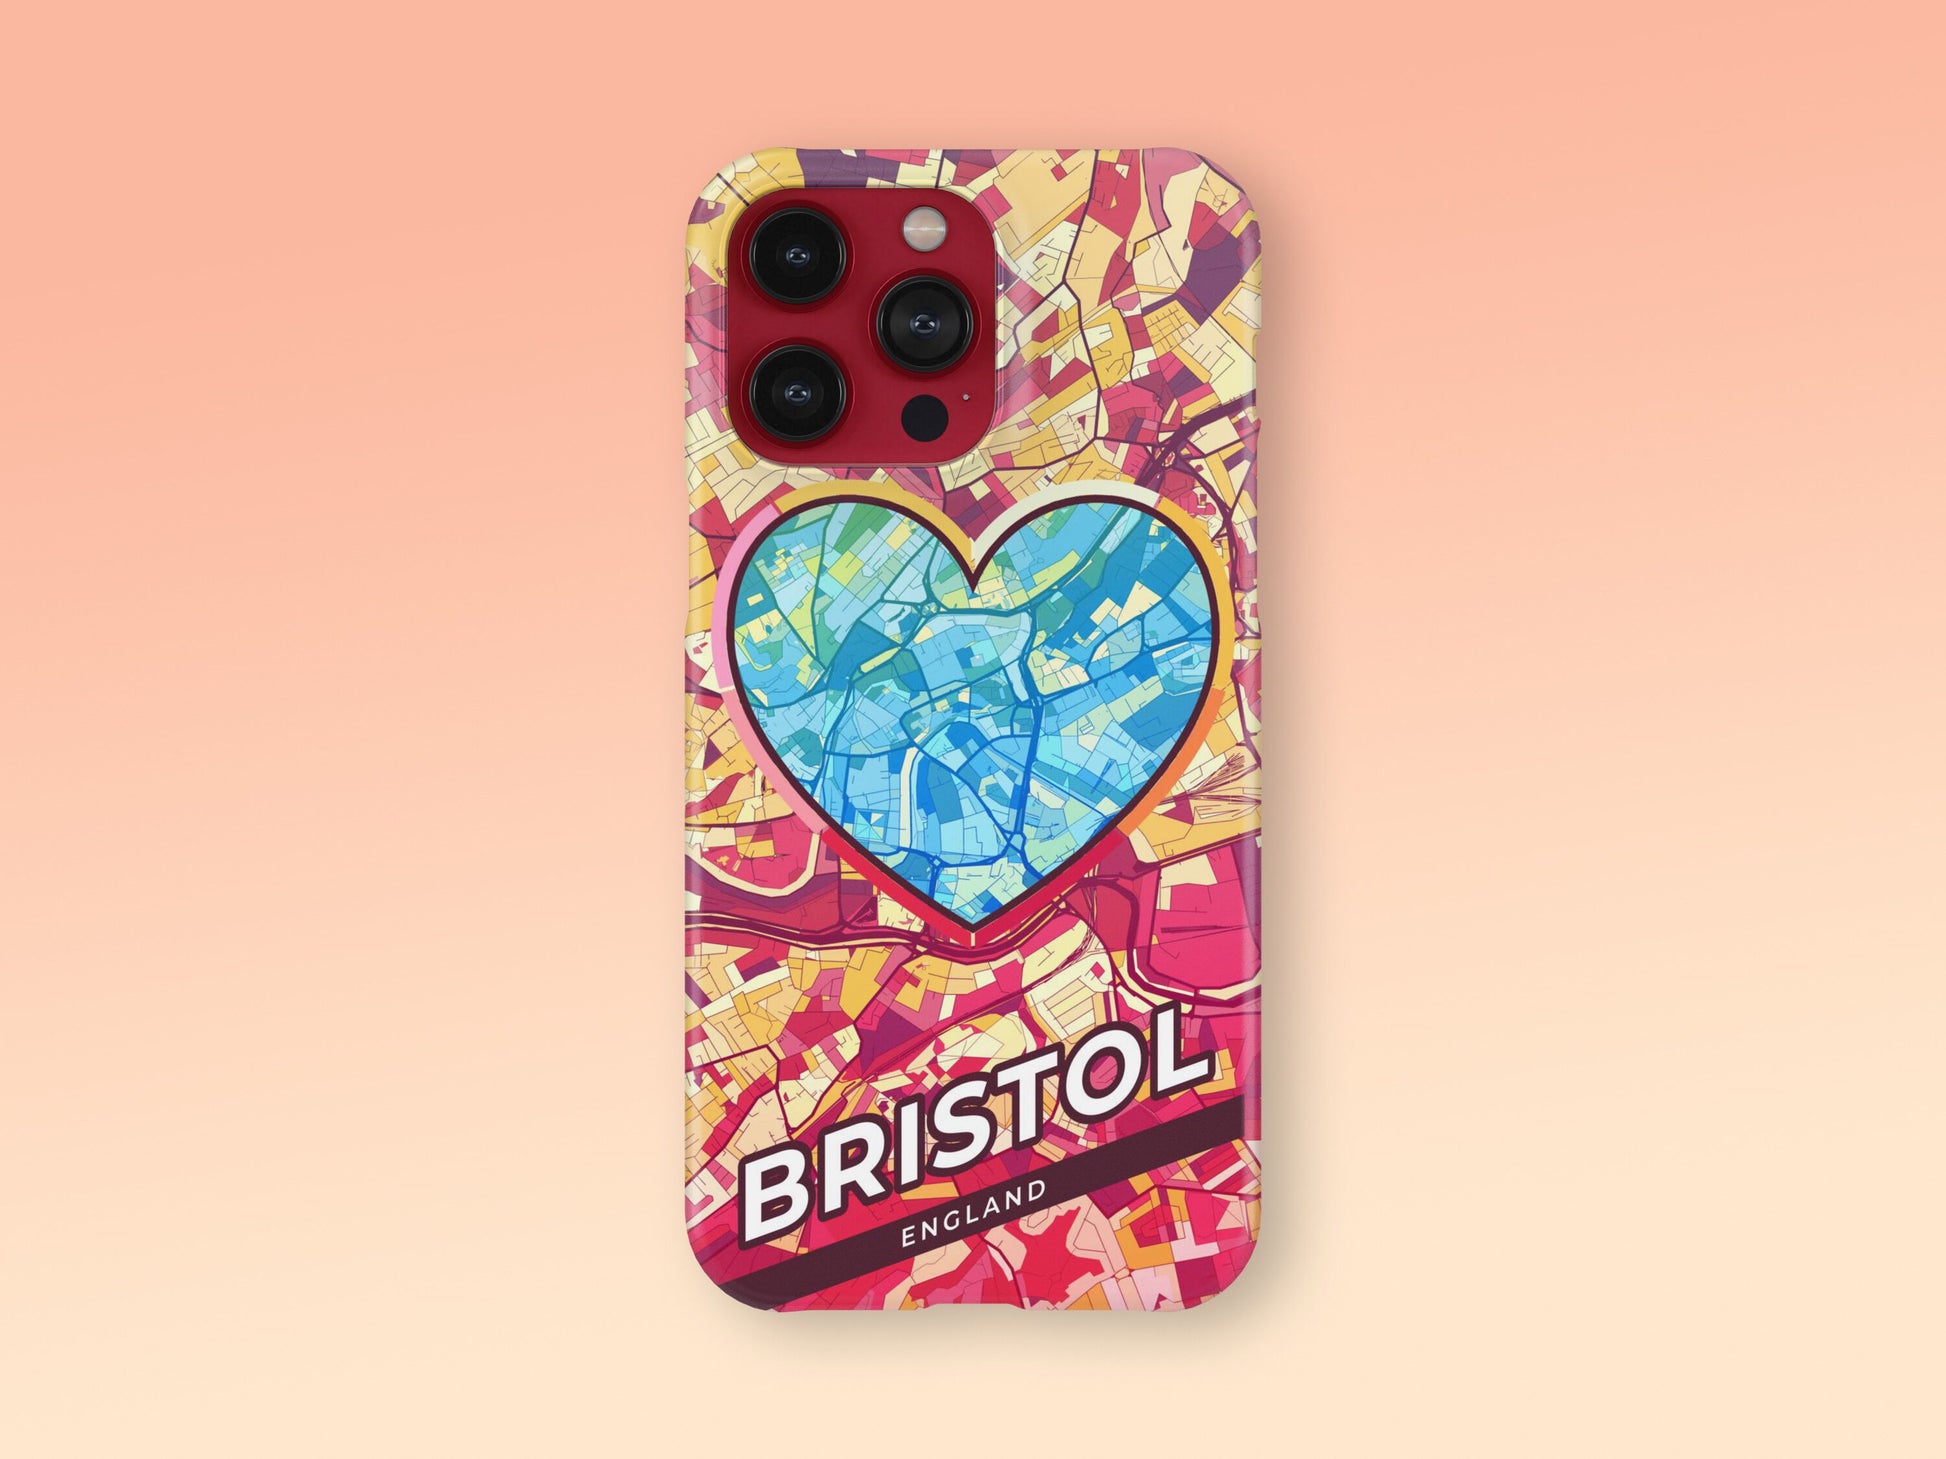 Bristol England slim phone case with colorful icon. Birthday, wedding or housewarming gift. Couple match cases. 2